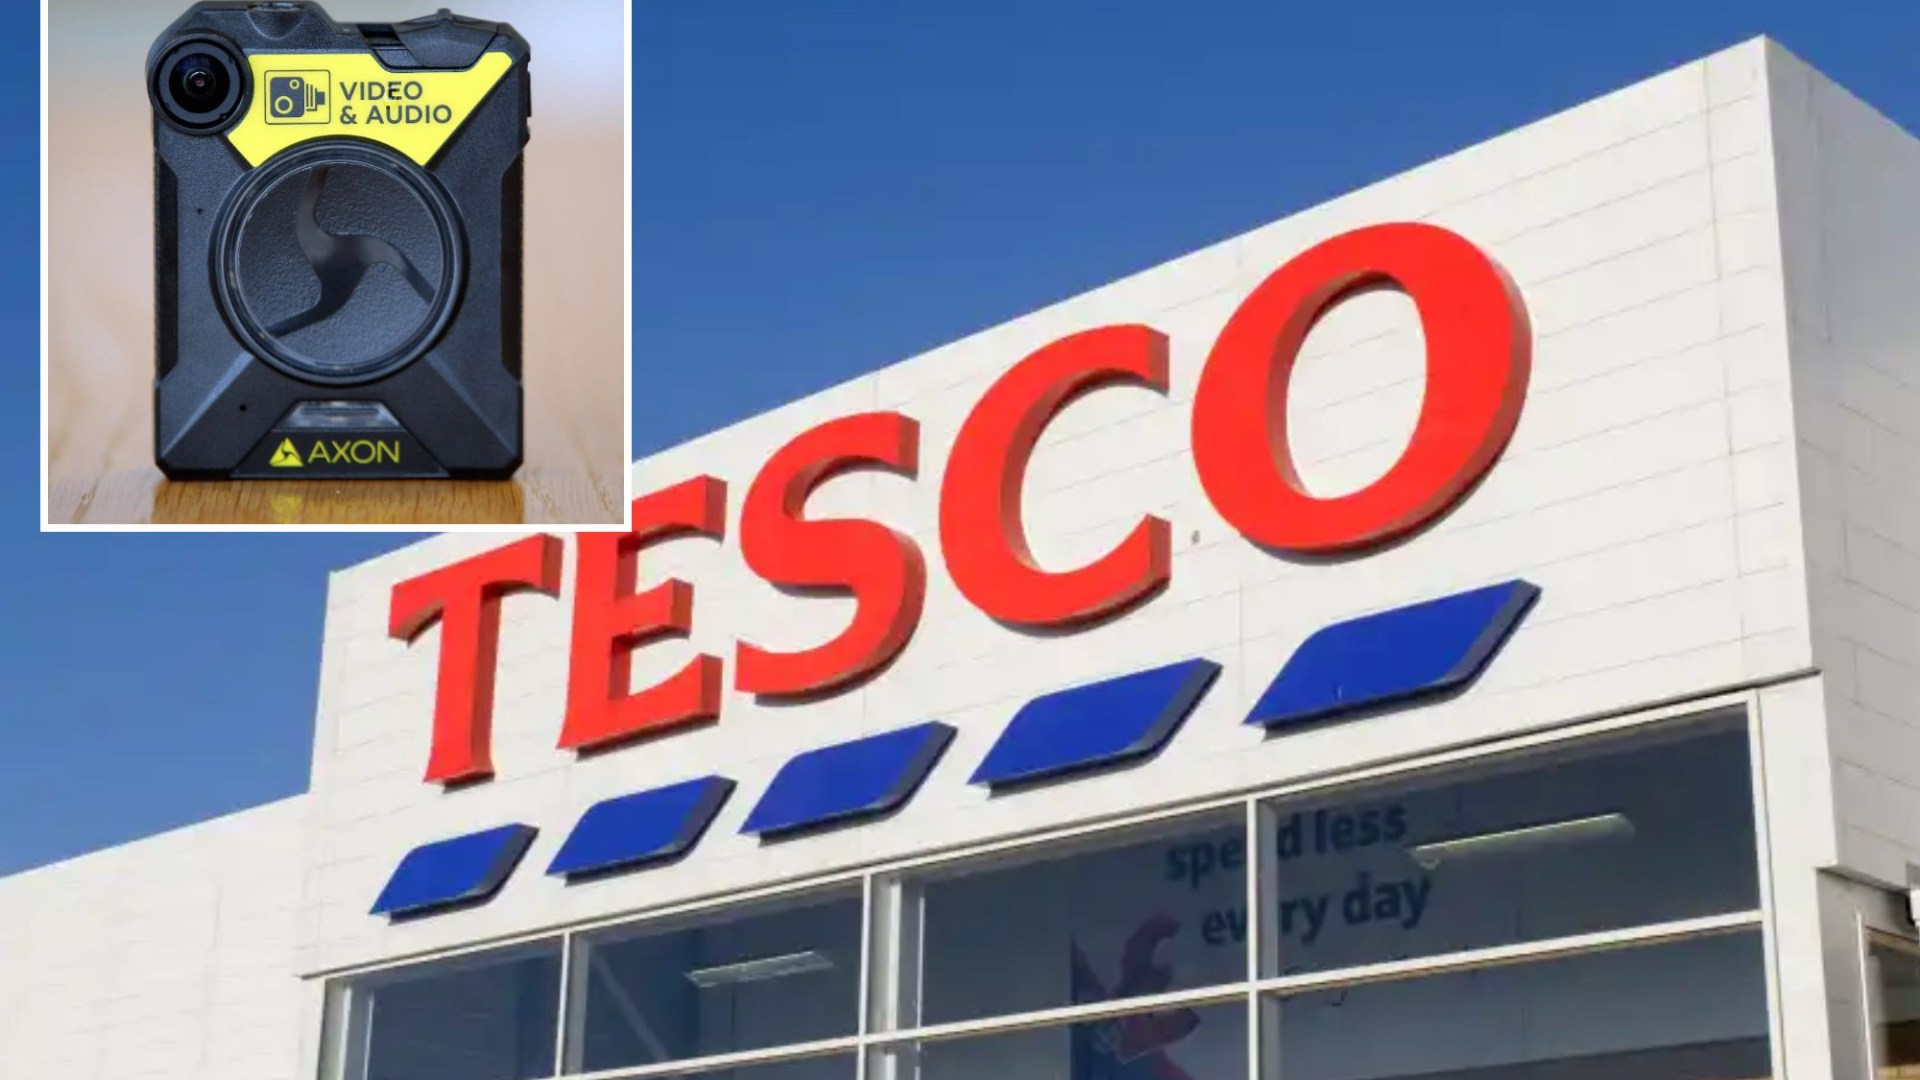 Tesco Employees to Receive Body Cameras Amid Surge in Violent Attacks